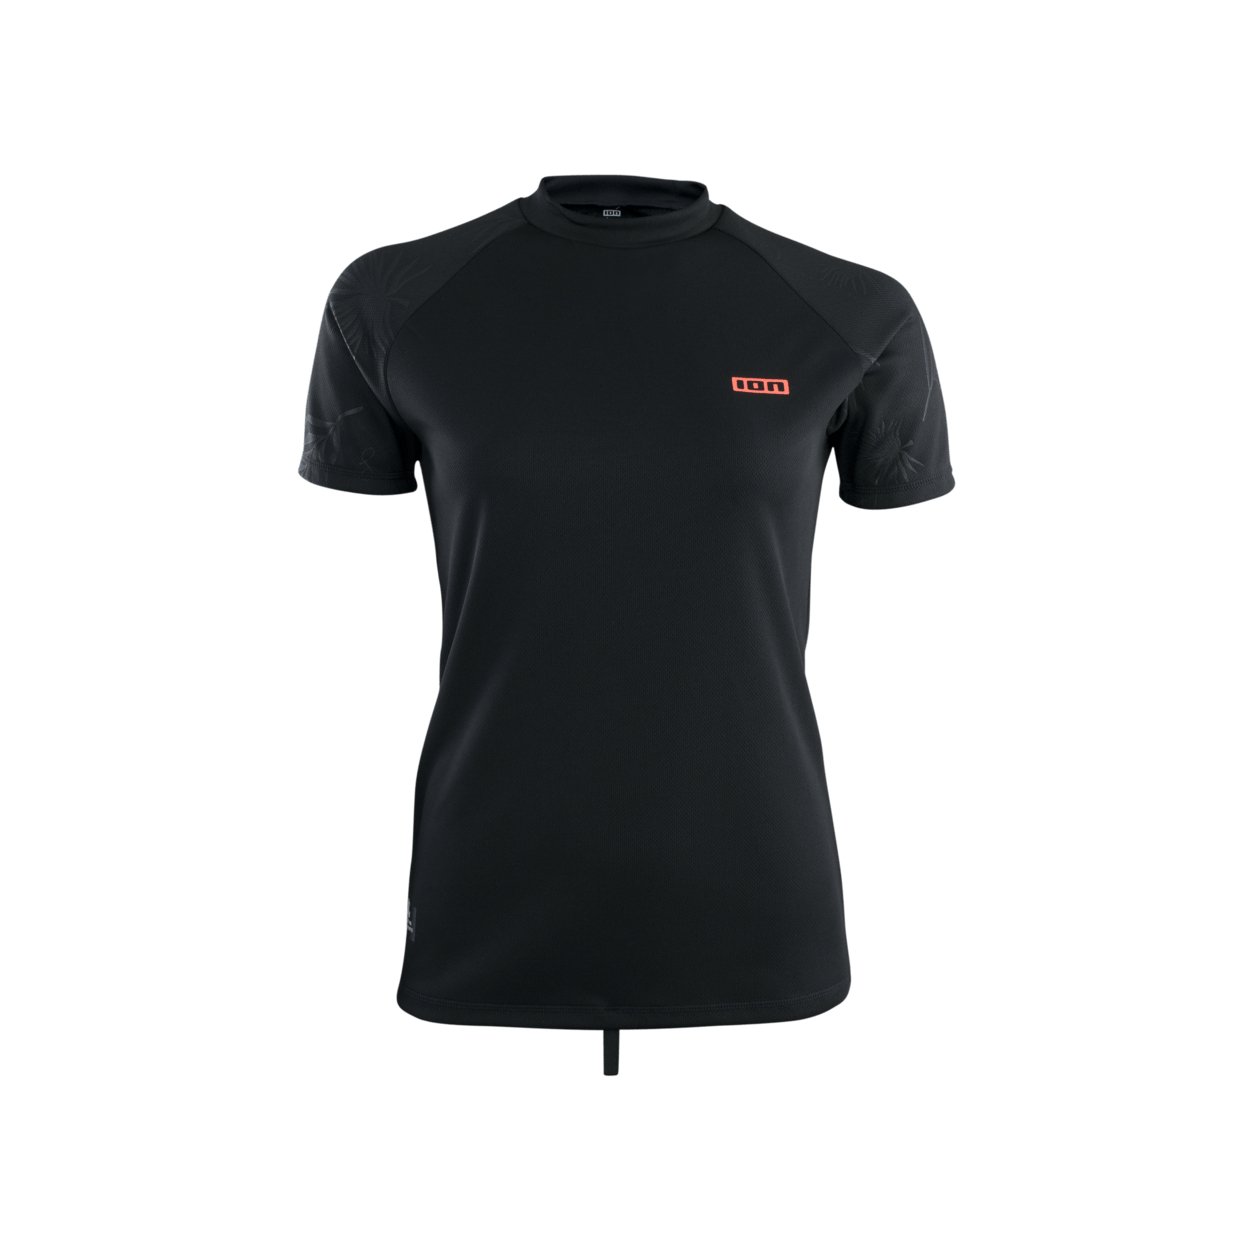 ION Wetshirt SS women 2023 - Worthing Watersports - 9010583117850 - Tops - ION Water